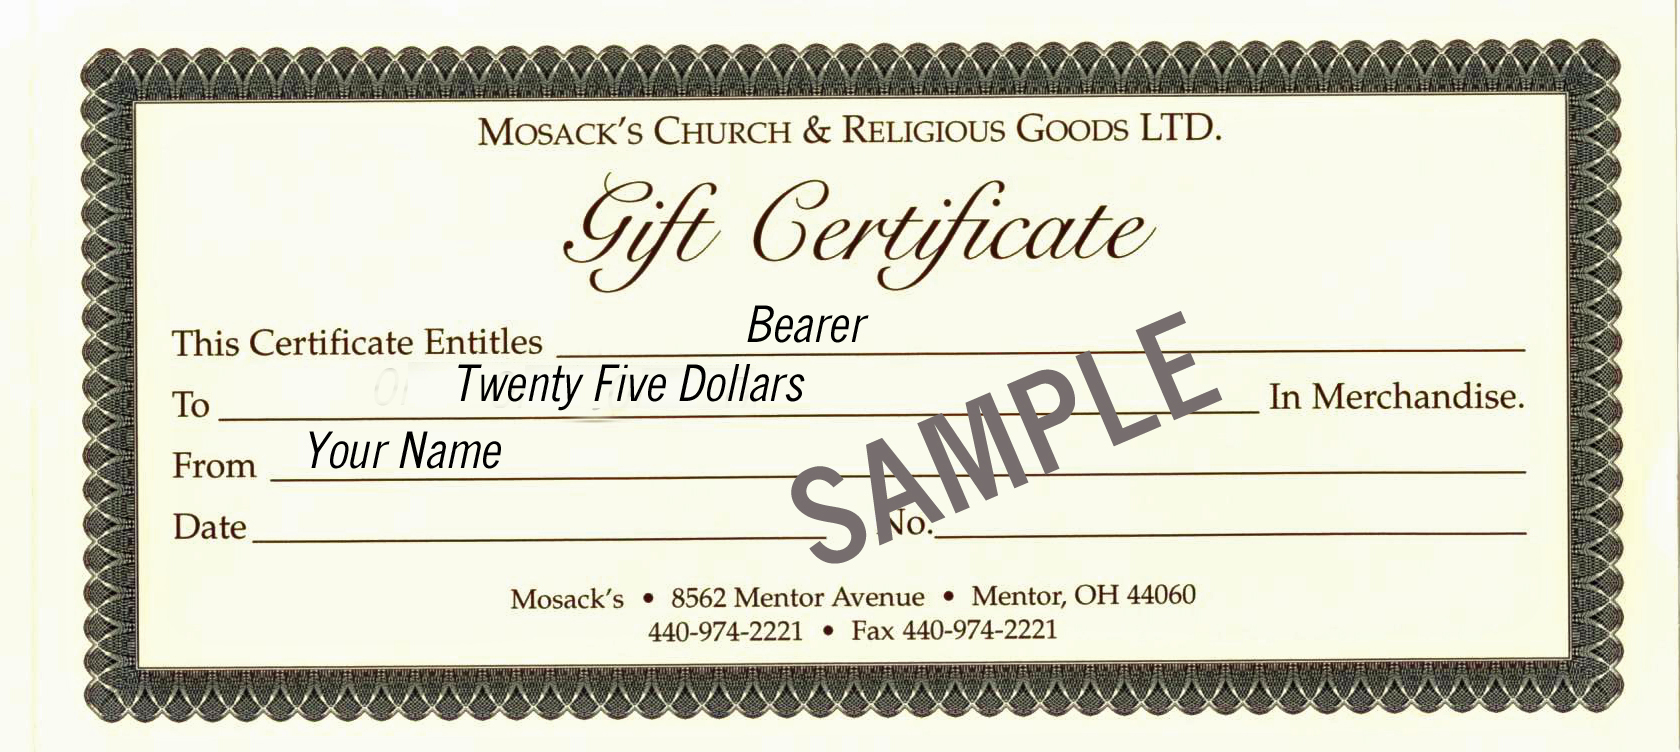 MOSACK'S $25 Gift Certificate